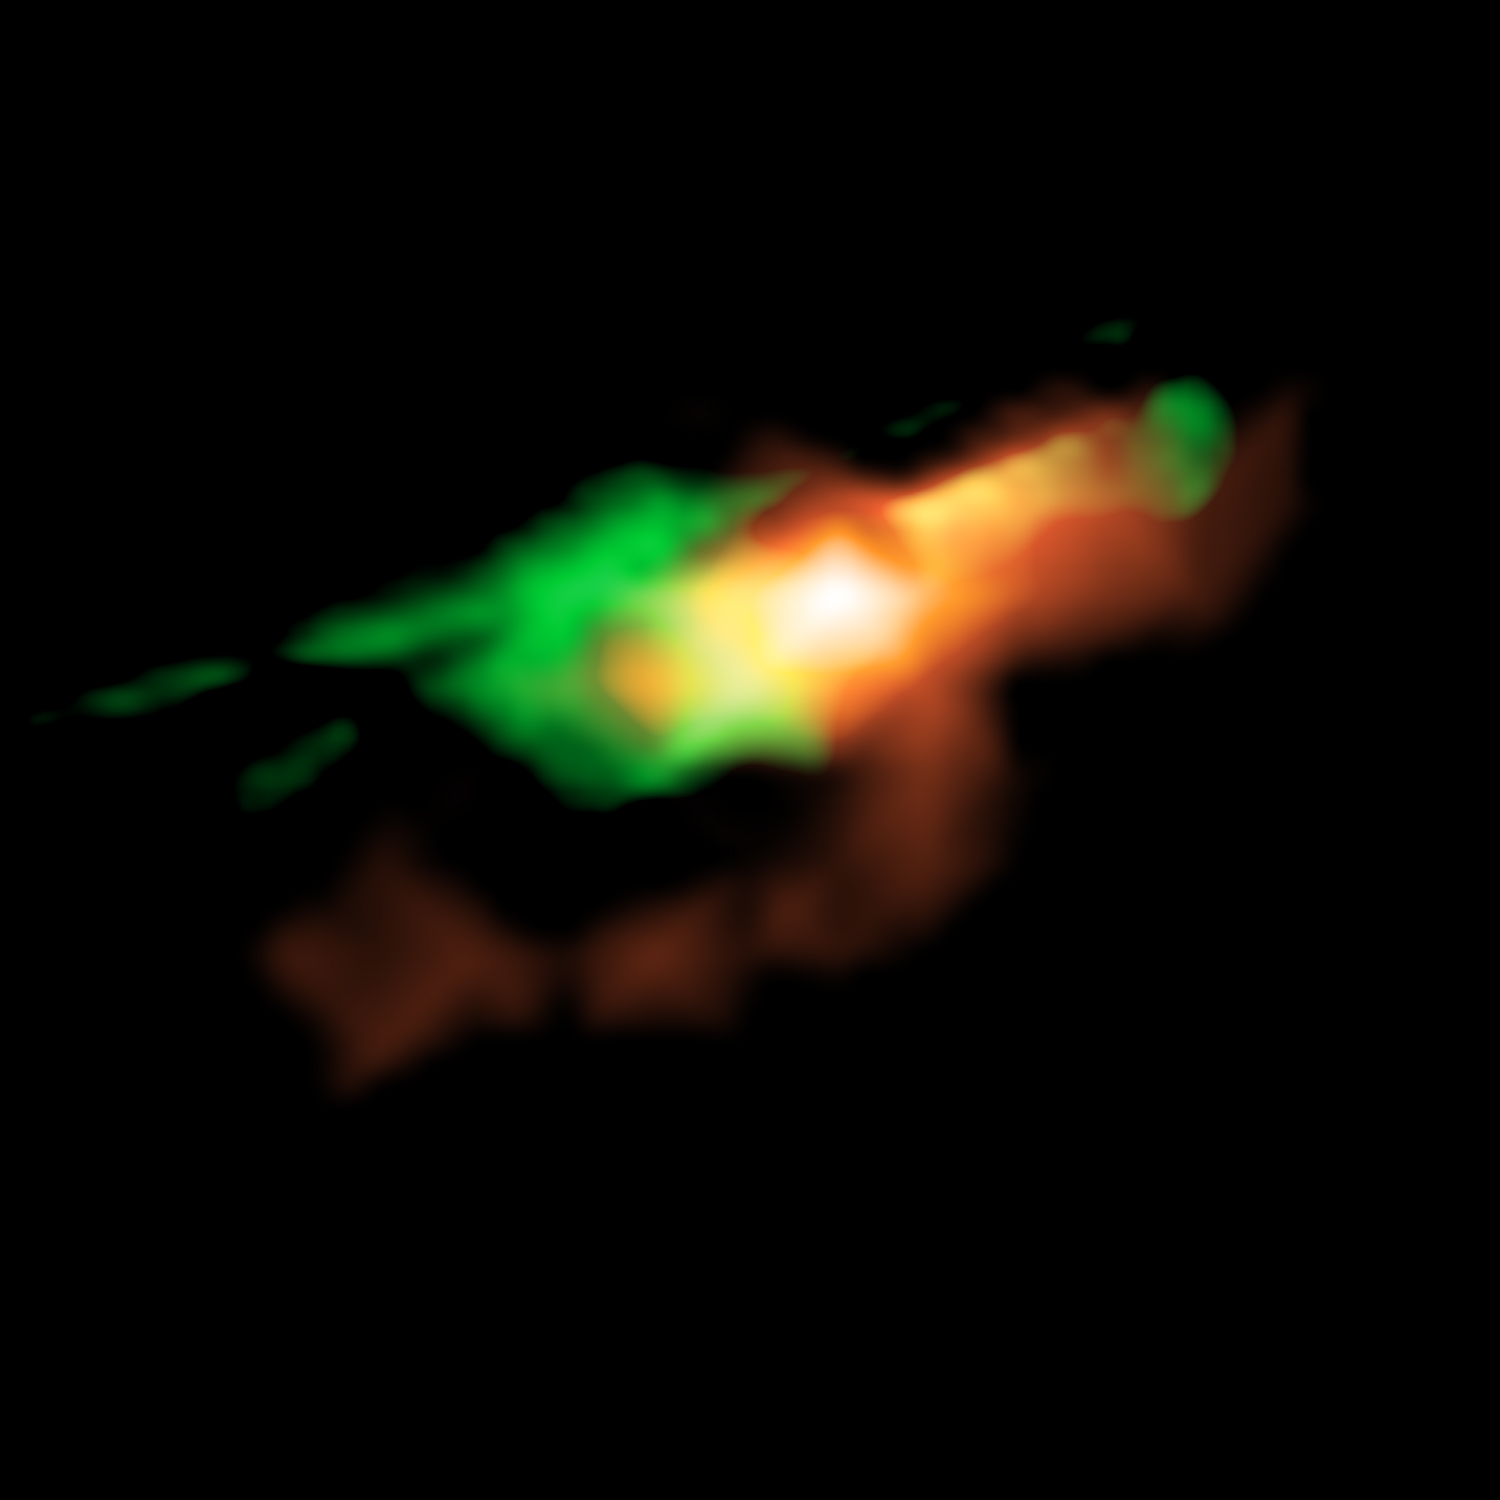 Reconstructed images of what MG J0414+0534 would look like if gravitational lensing effects were turned off. The emissions from dust and ionized gas around a quasar　are shown in red. The emissions from carbon monoxide gas are shown in green, which have a bipolar structure along the jets. Credit: ALMA (ESO/NAOJ/NRAO), K. T. Inoue et al.